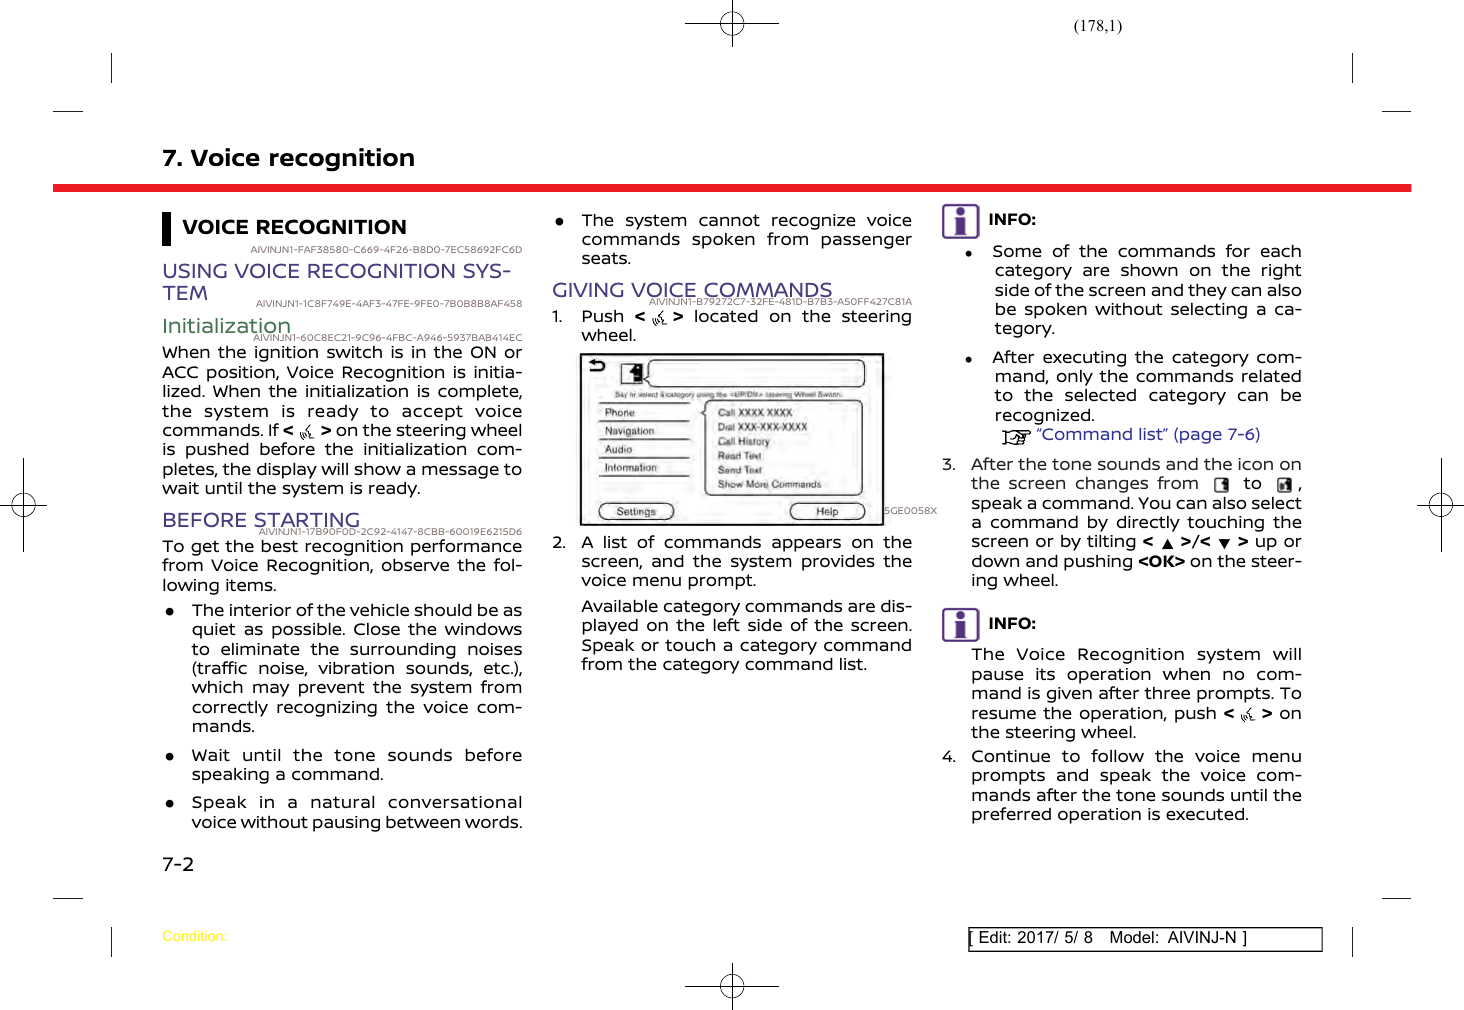 Page 178 of Robert Bosch Car Multimedia AIVICMFB0 Navigation System with Bluetooth and WLAN User Manual